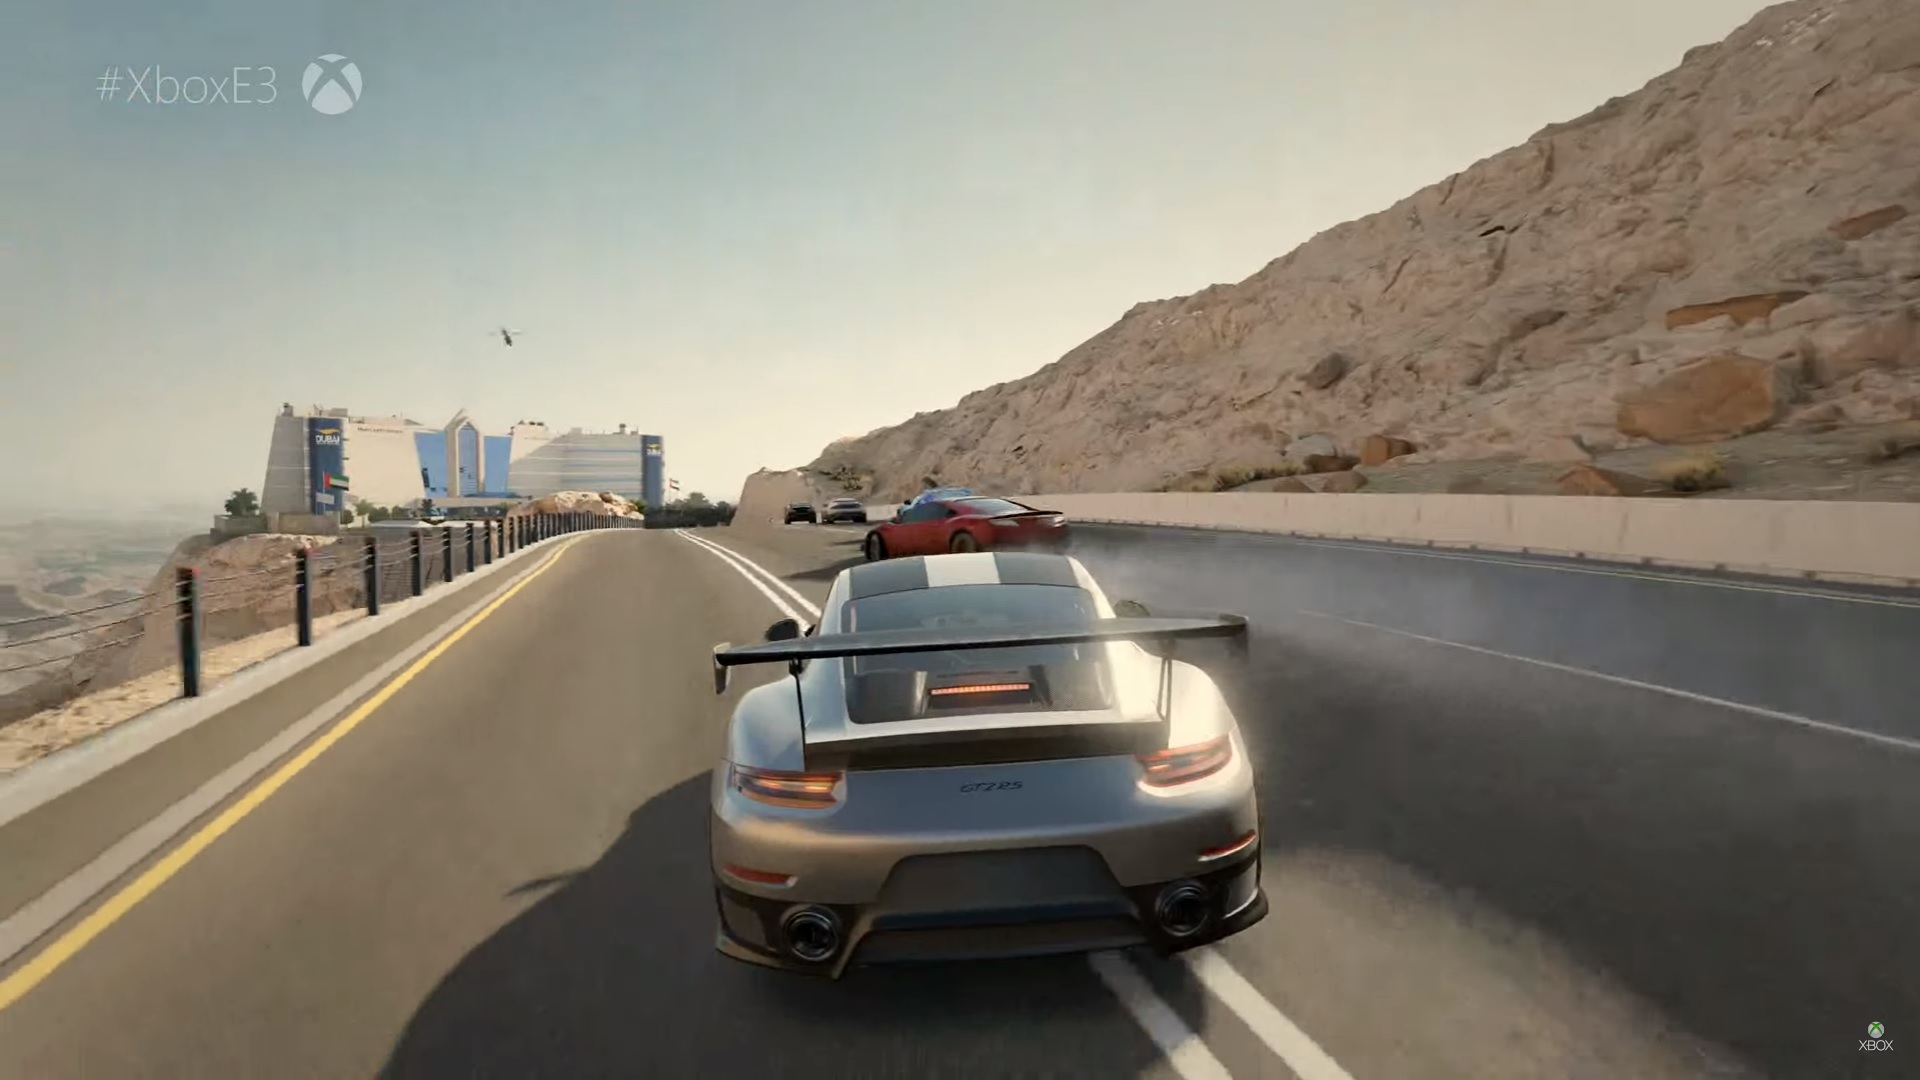 Microsoft Unveils Forza Motorsport 7 and the Porsche GT2 RS at E3 2017